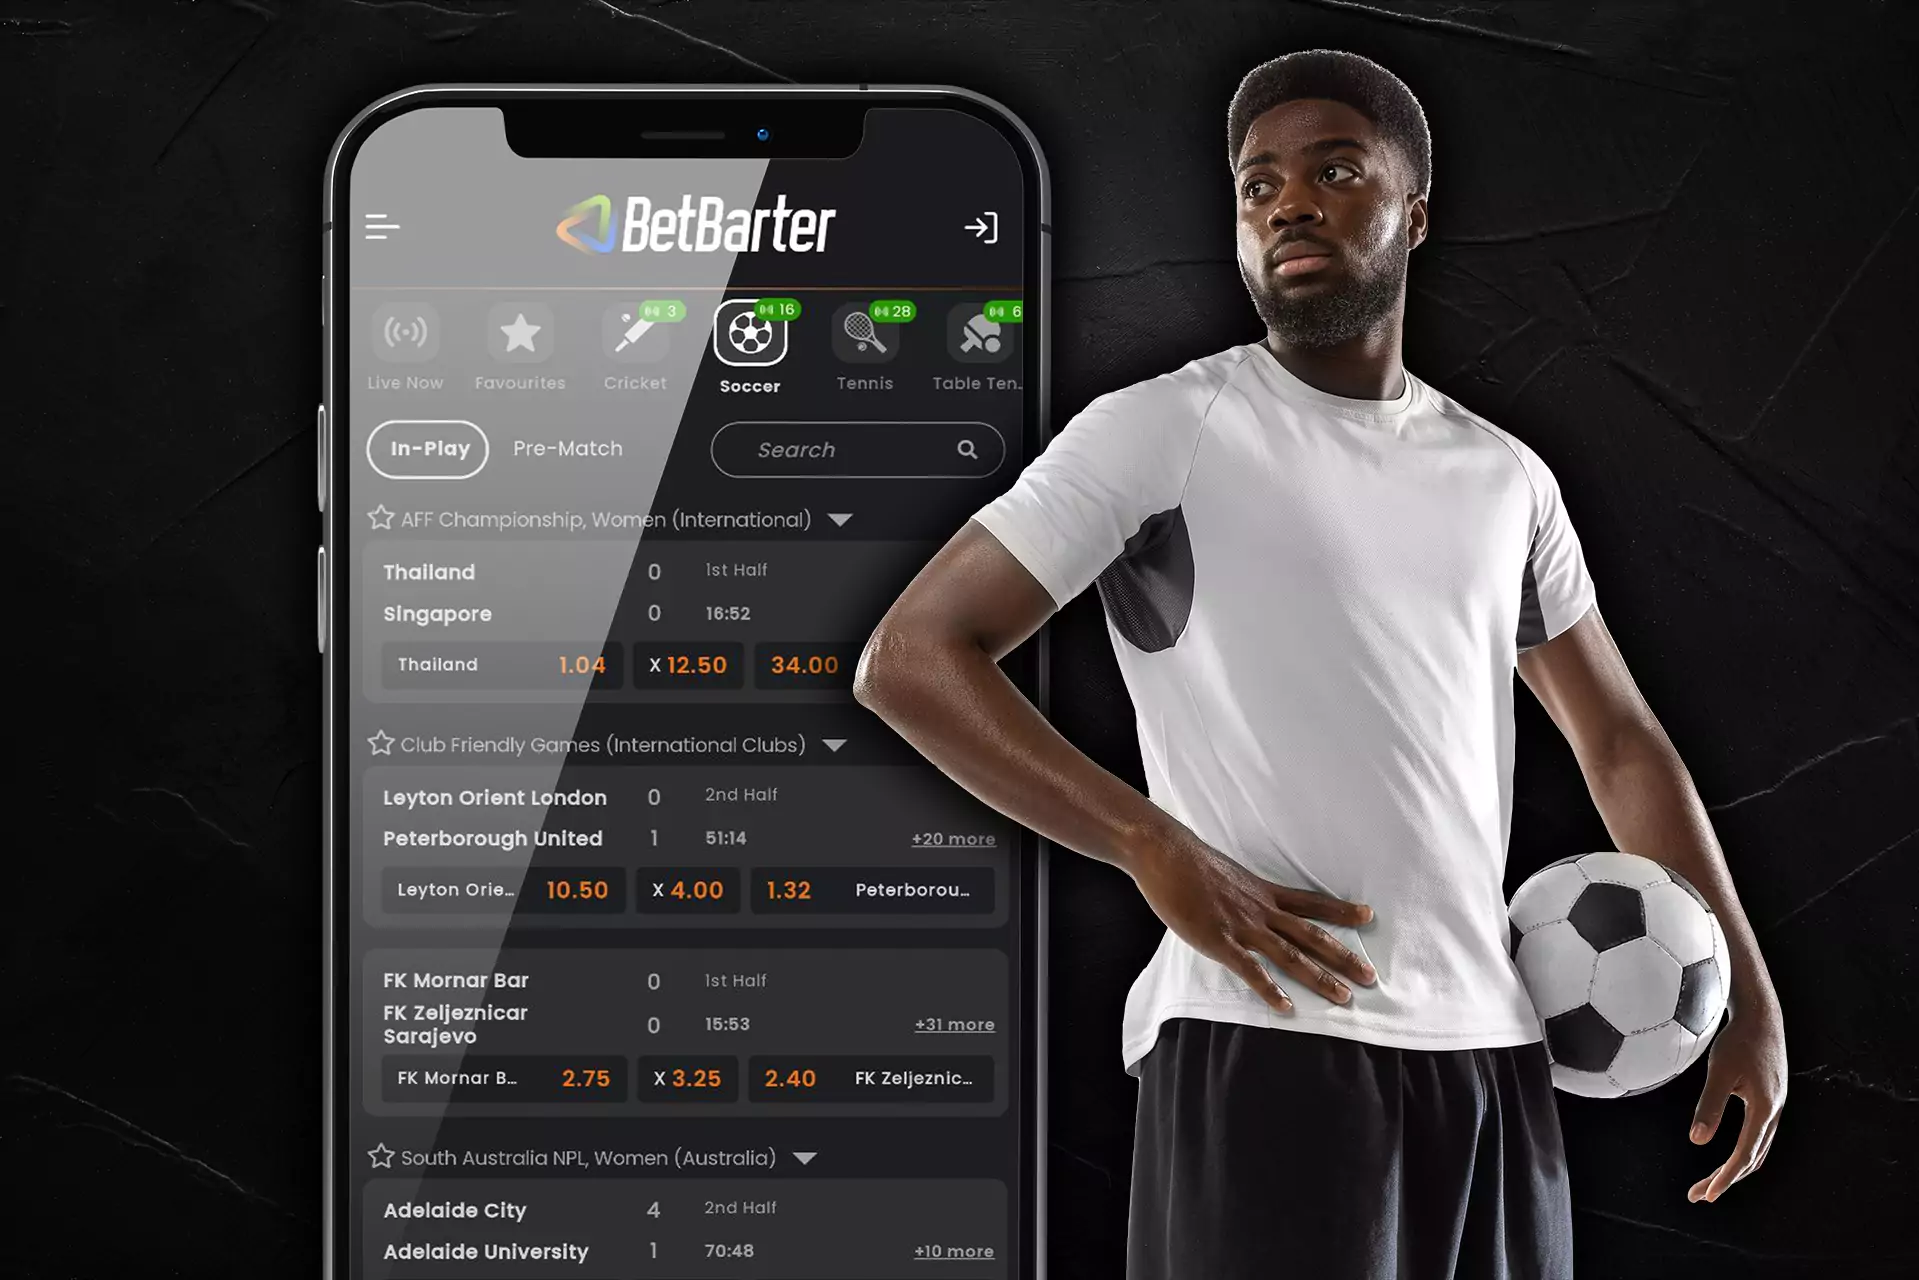 Football betting avialable in the Betbarter app.